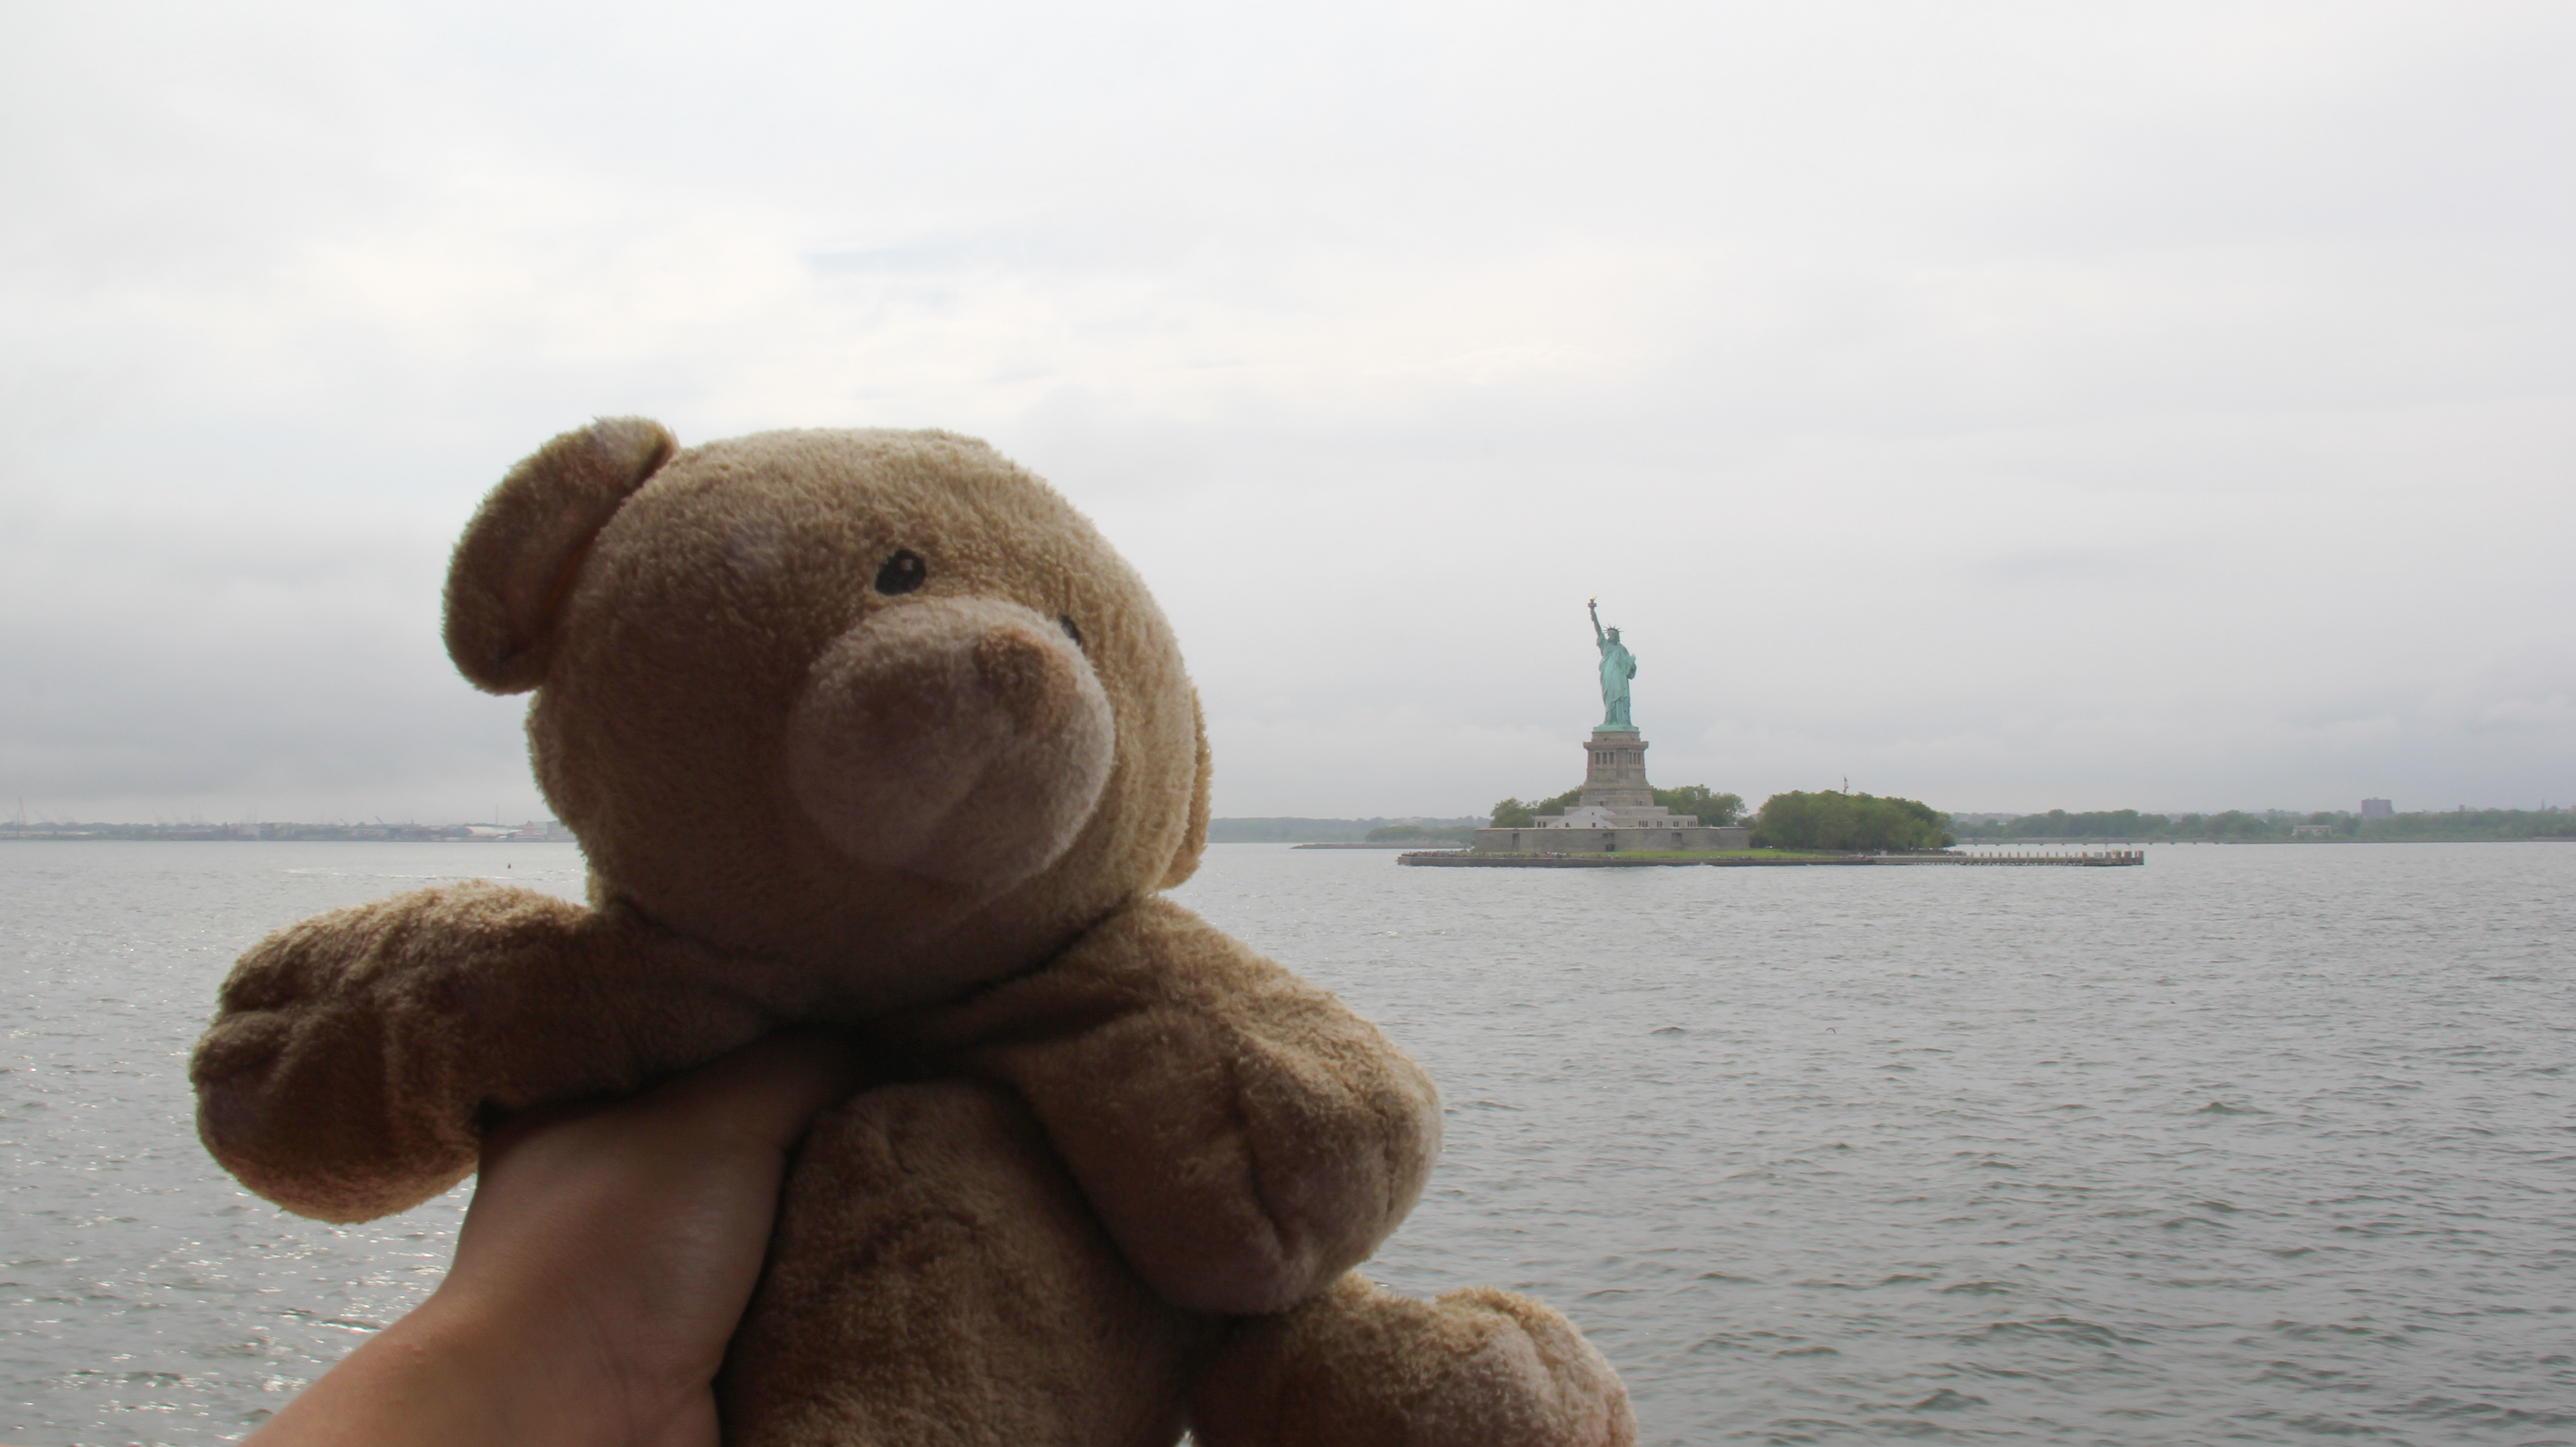 Passing by the Statue of Liberty.